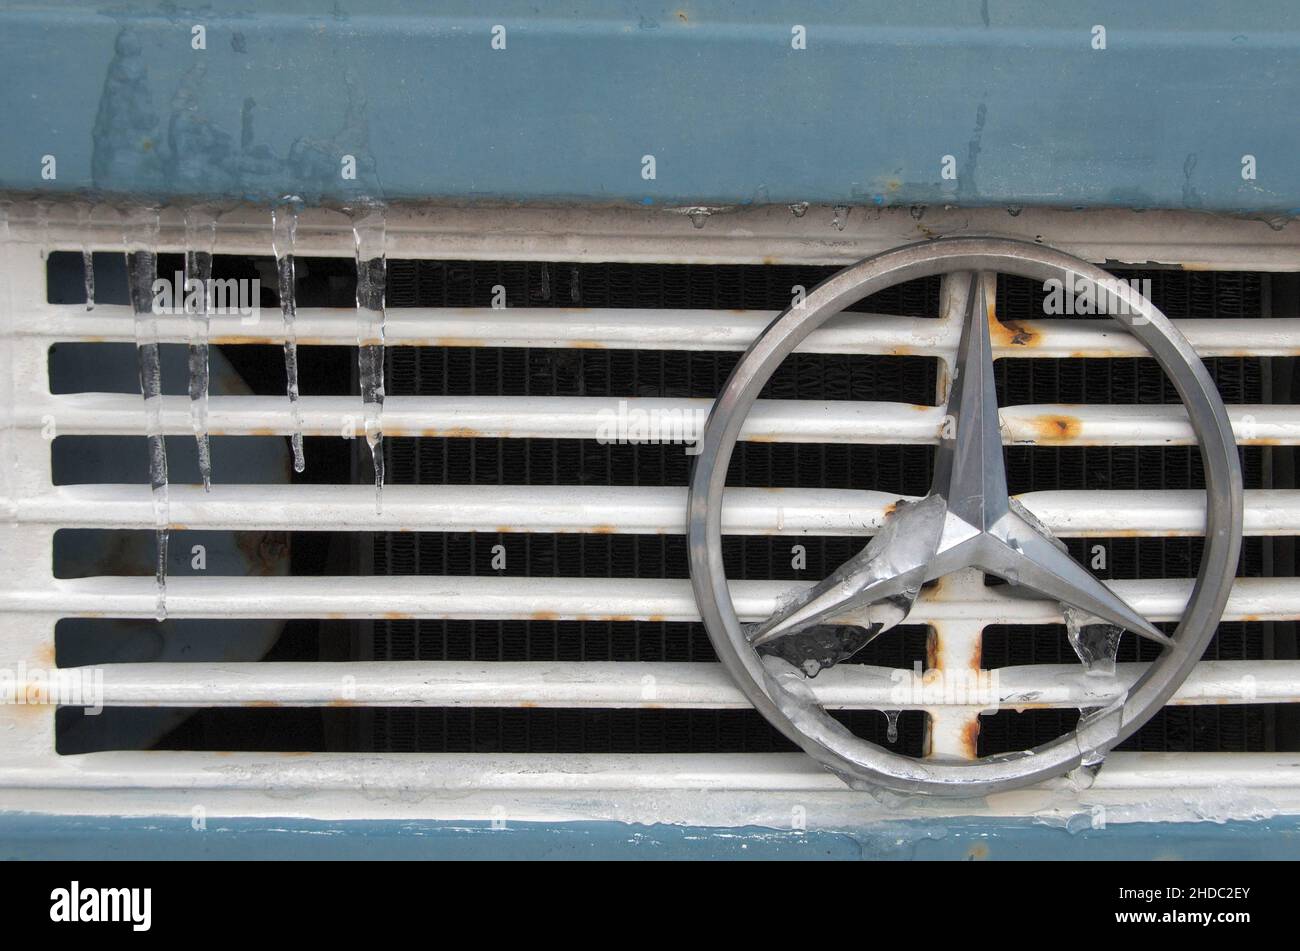 Mercedes star on radiator grille of truck with icicles Stock Photo